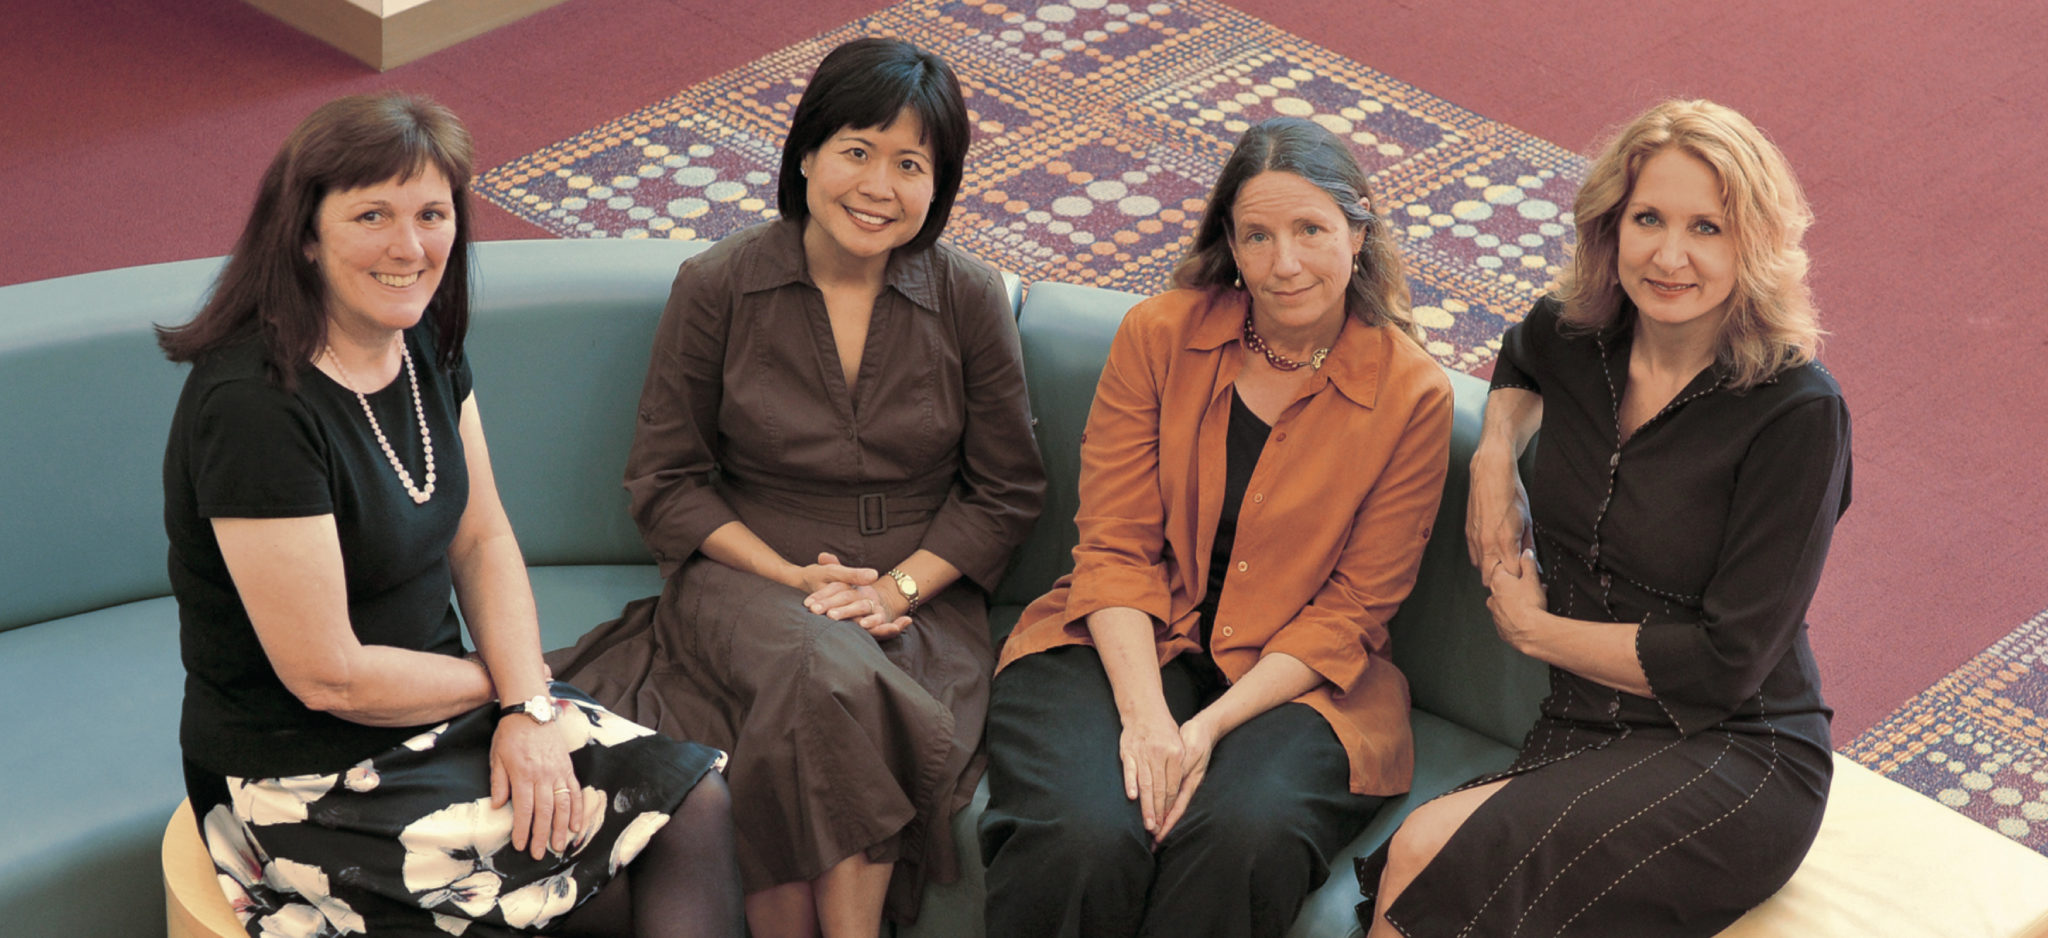 Presidential Recognition: From left, Rosa Marie Beebe, Elsa Chen, Susan Parker, and Beth Van Schaack. Photo: Charles Barry1